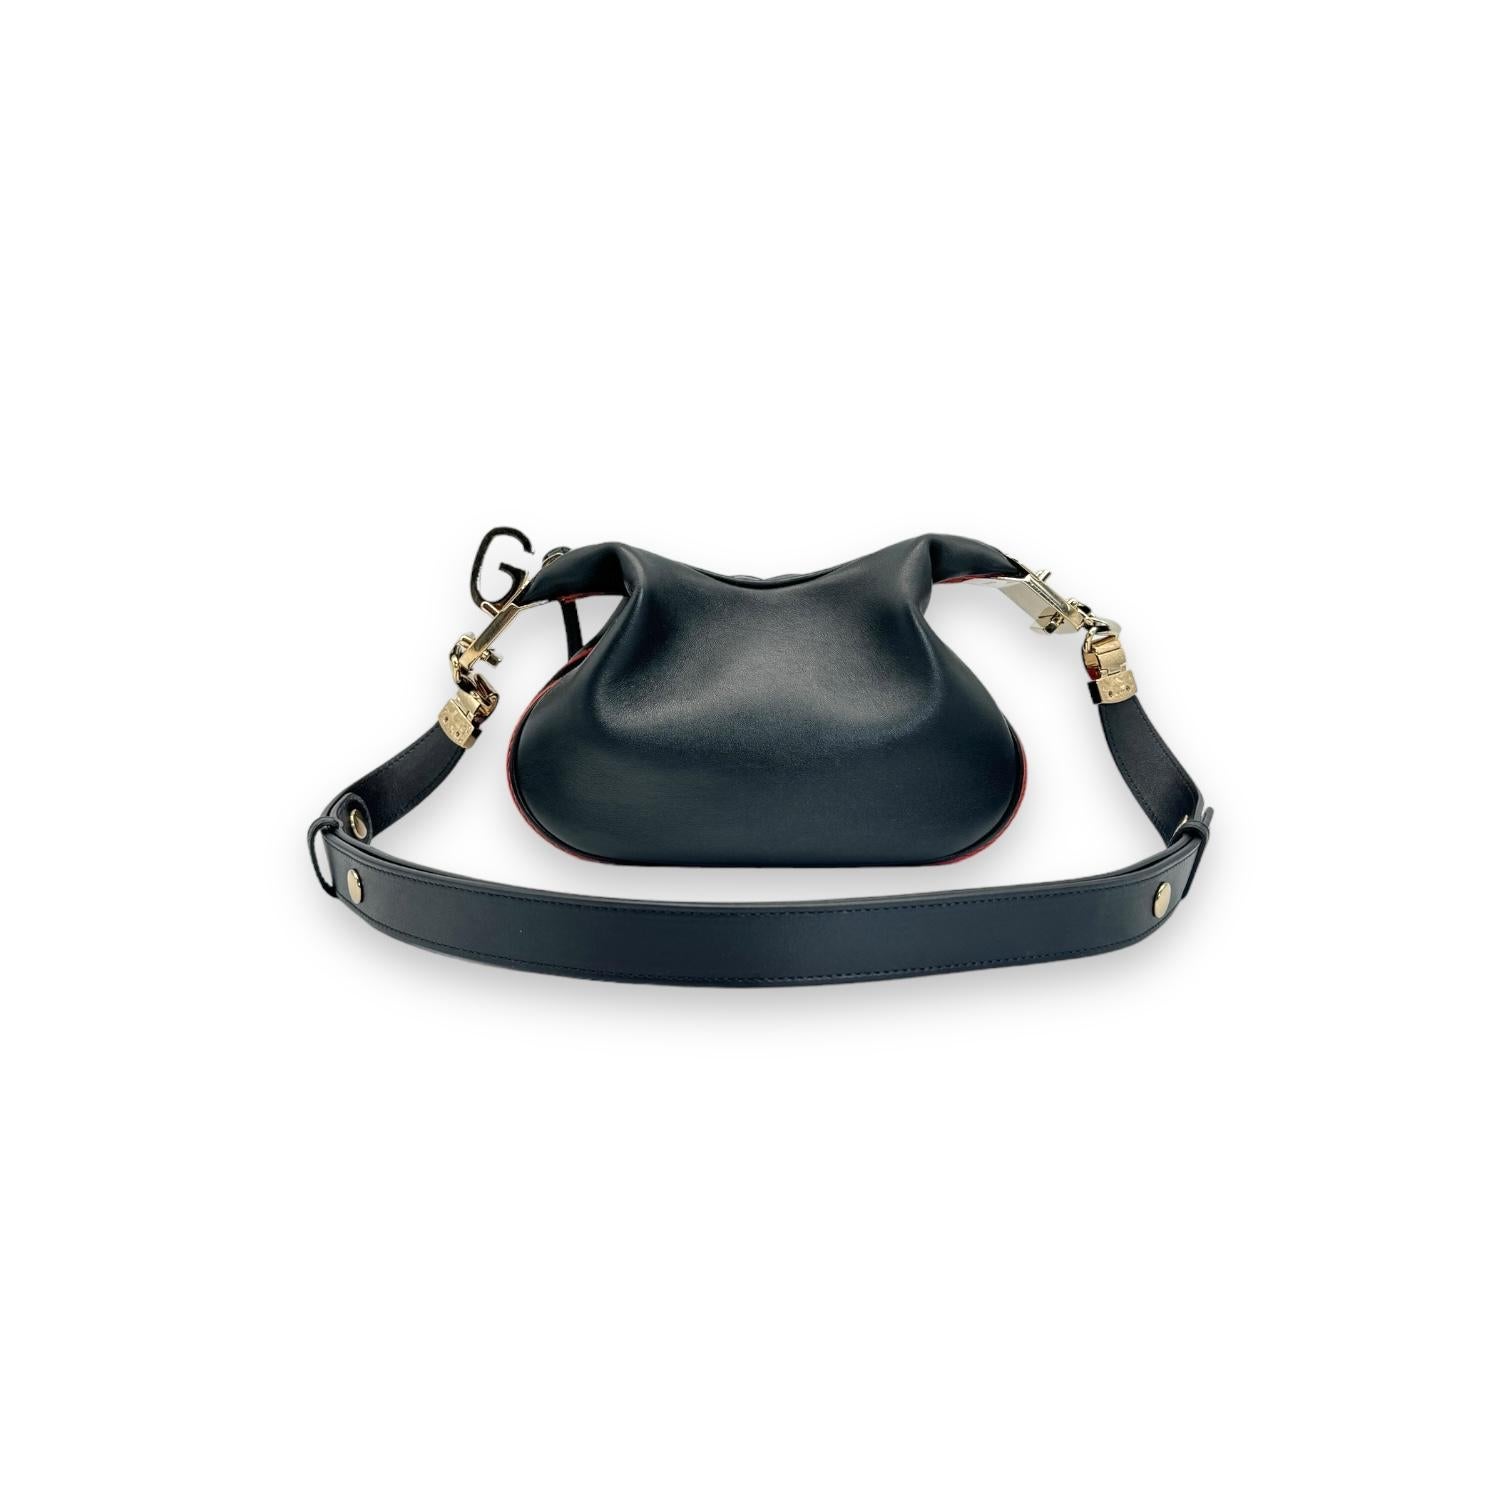 Elevate your style with the Gucci Small Attache Black Leather Crossbody Bag. Crafted in Italy with premium black leather, this bag features a spacious single zip compartment with a luxurious gold-tone zipper closure. The addition of an adjustable